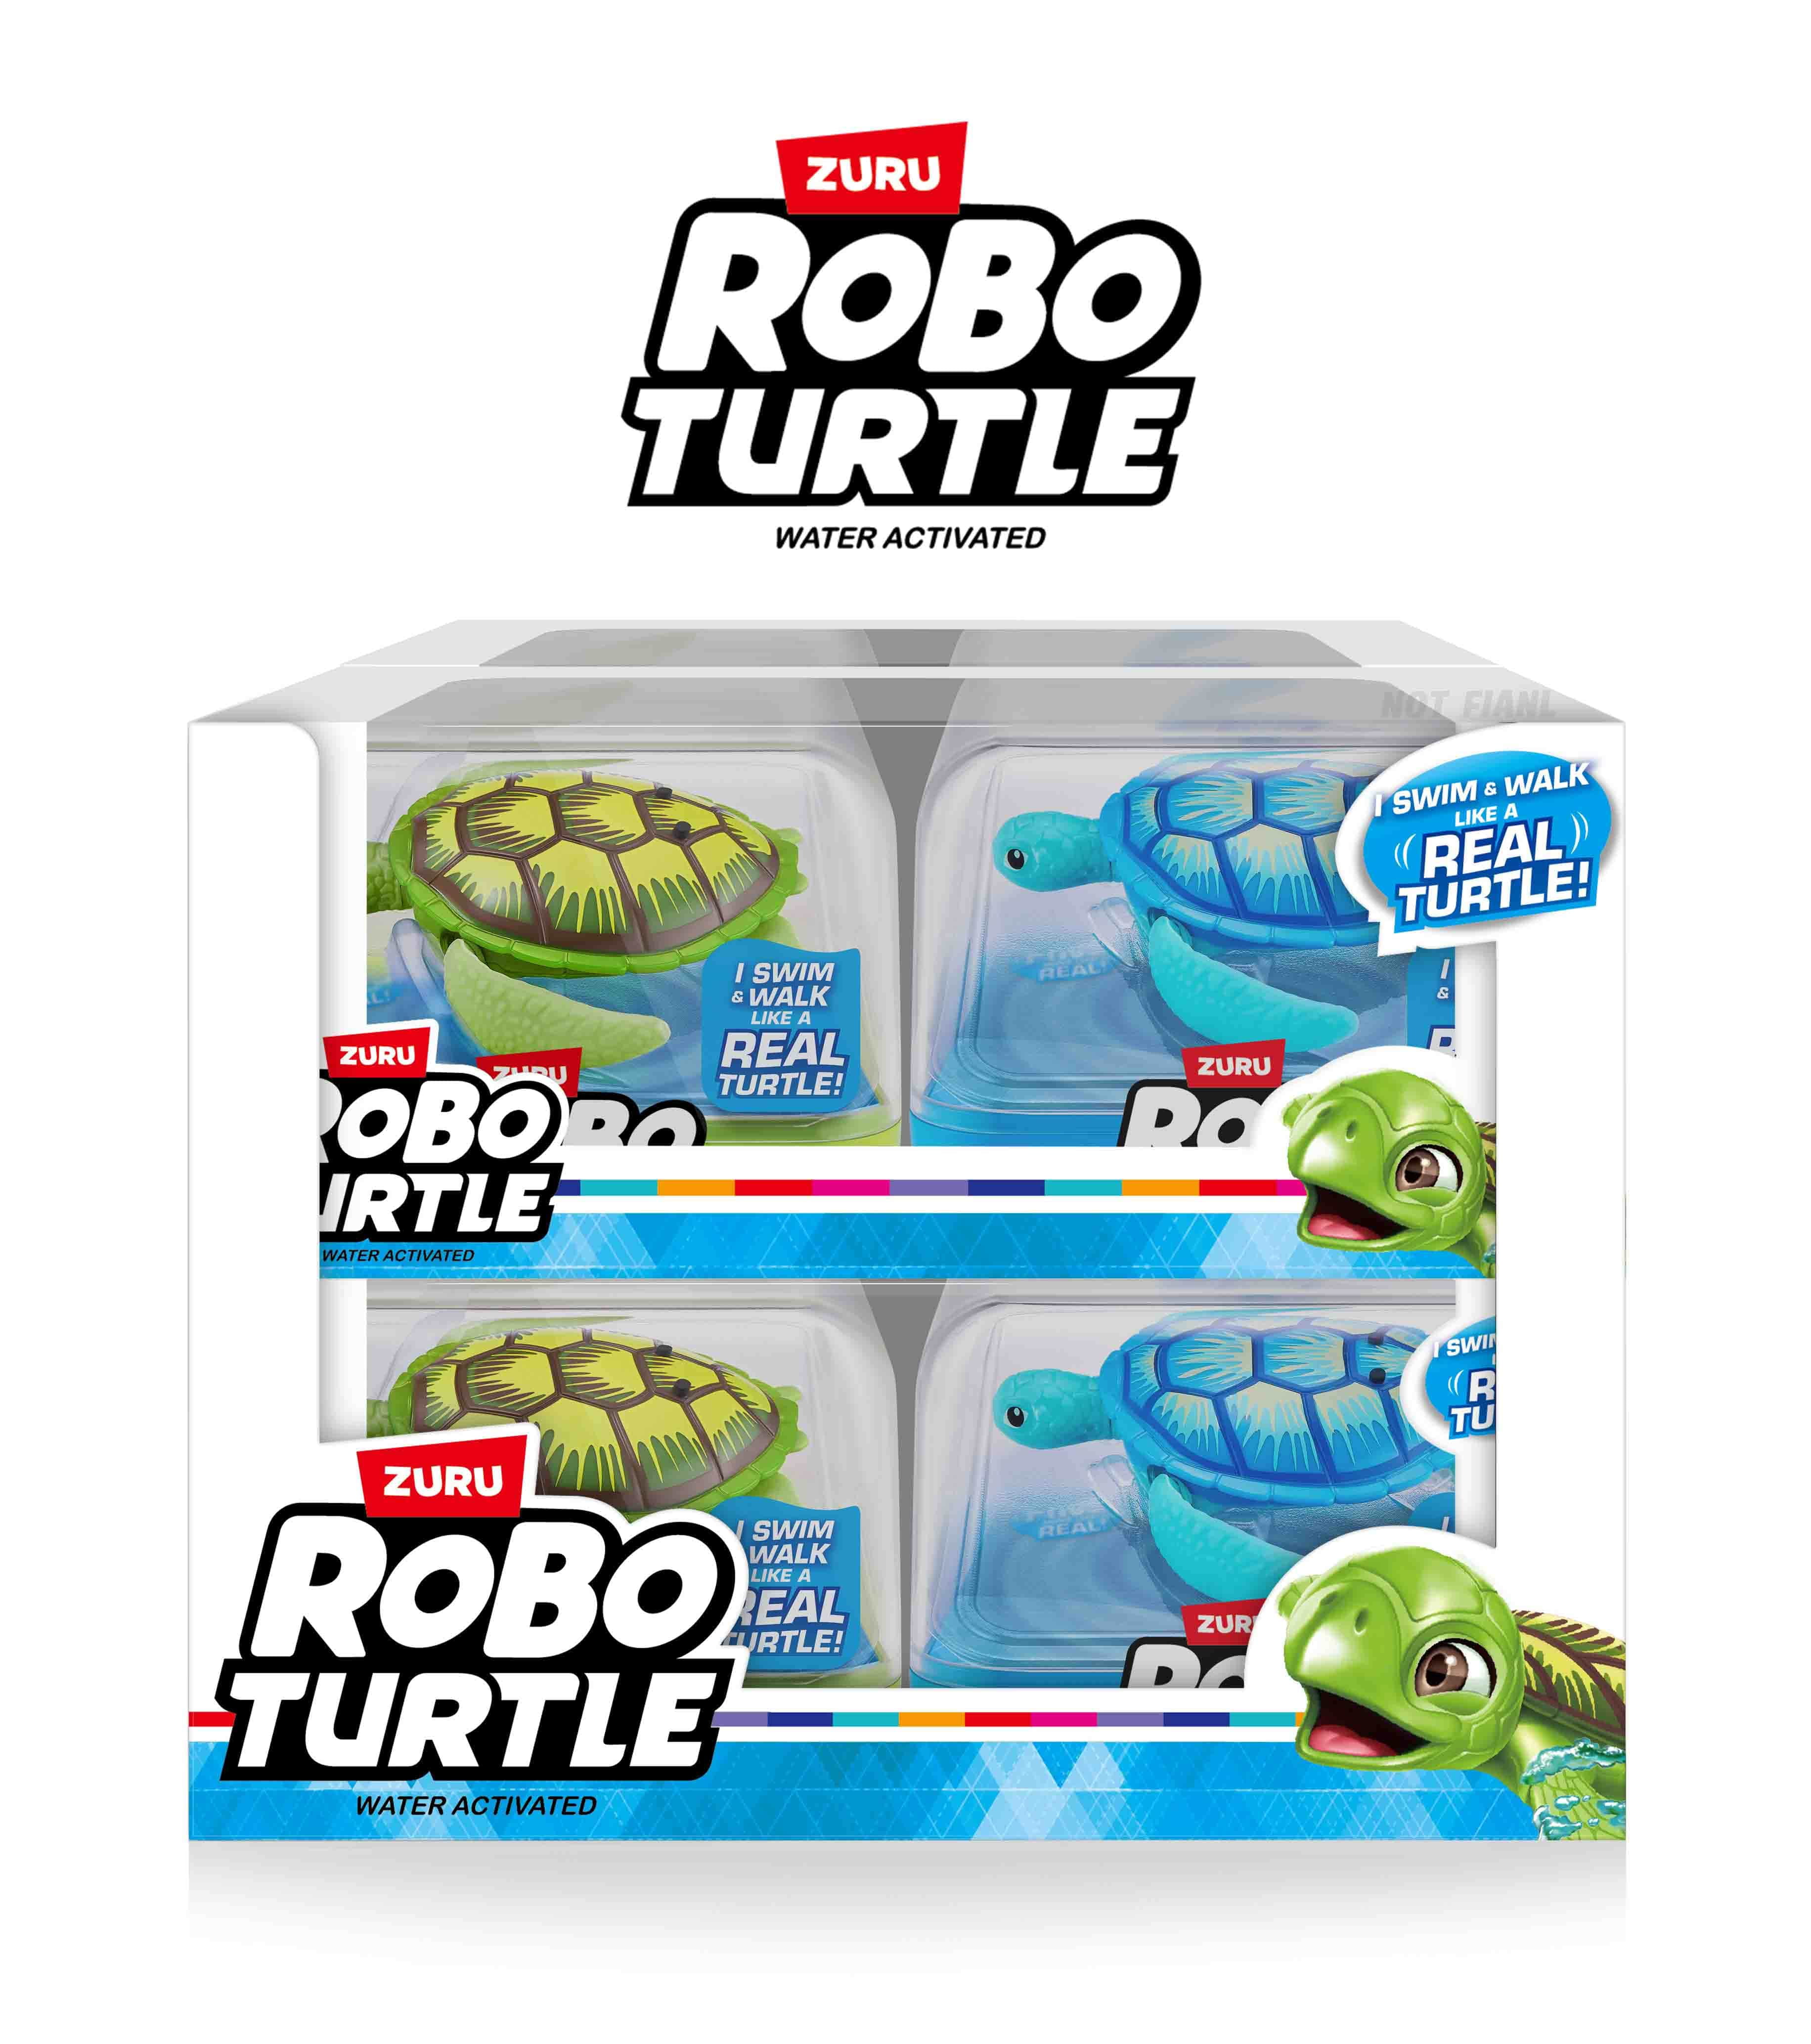 Robo Alive Turtle 2 Pack by Zuru Electronic Pet Action Figure